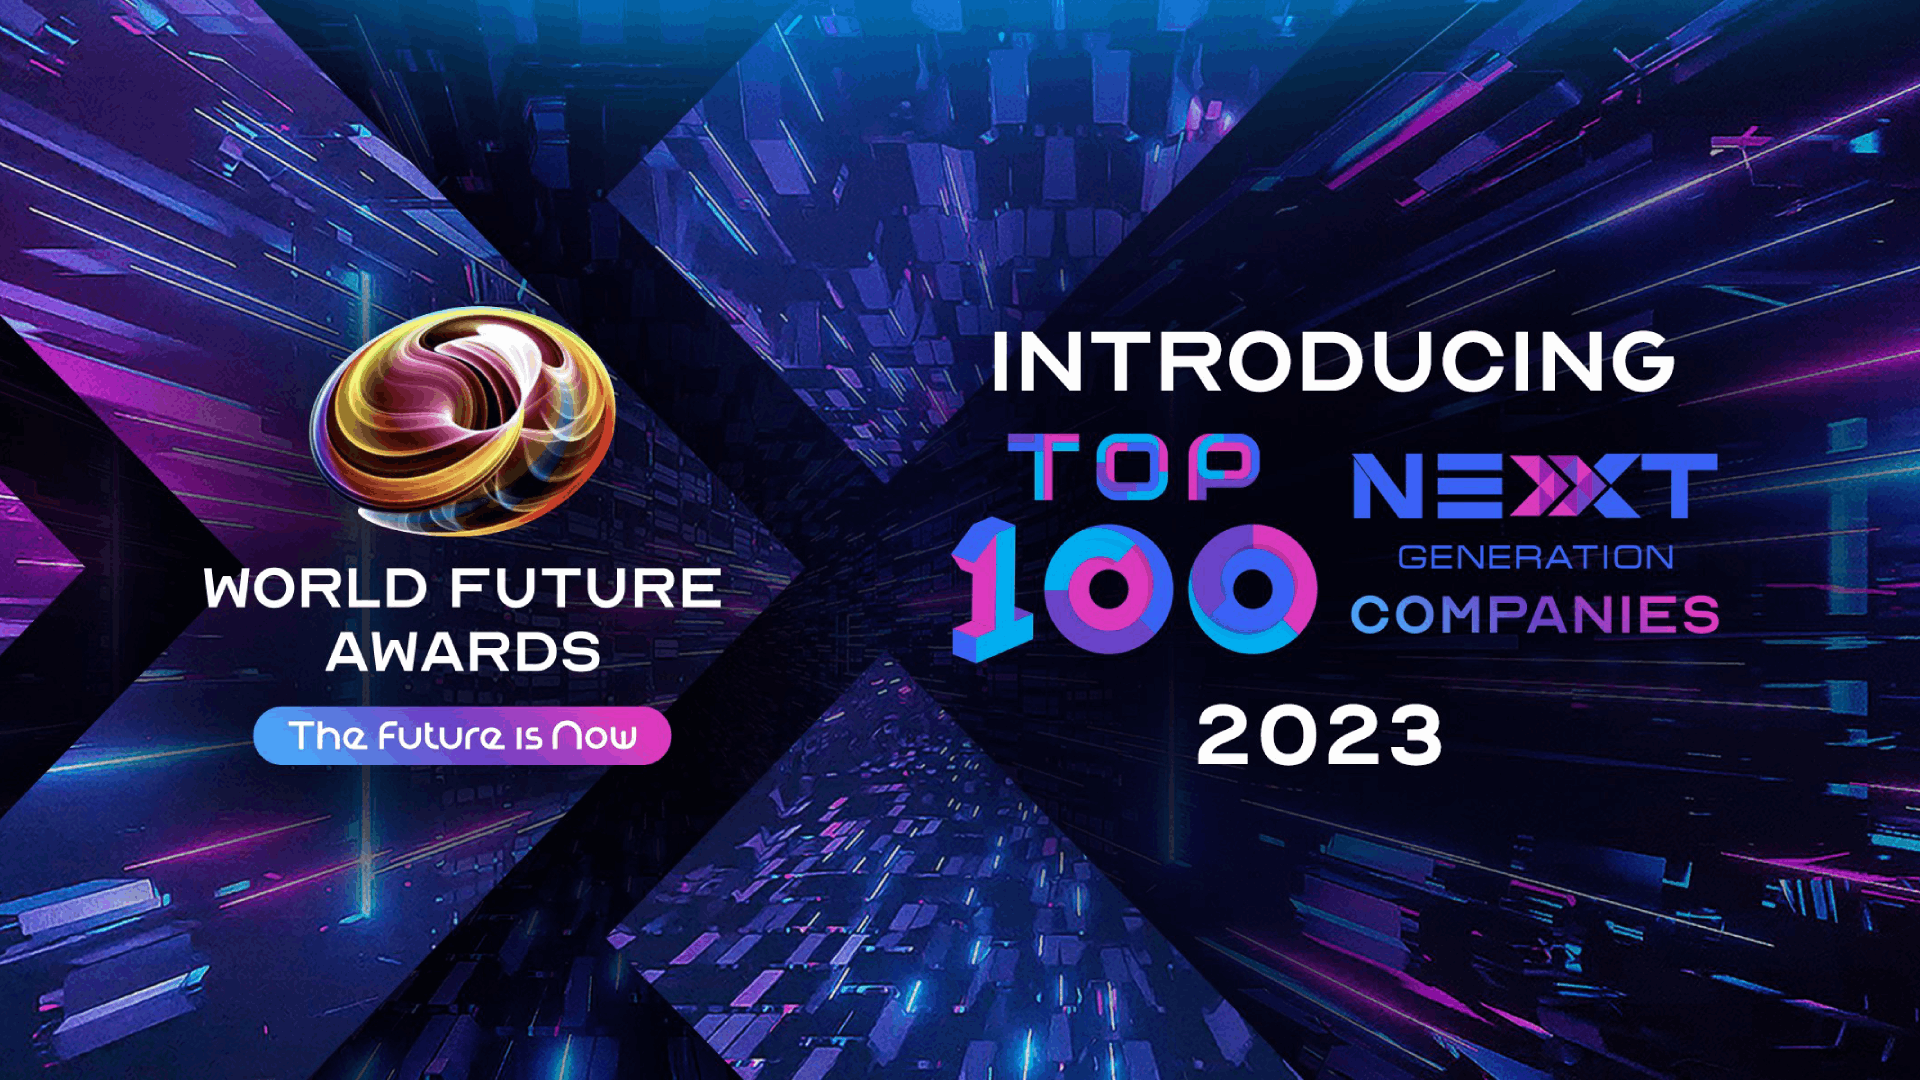 The Top 100 Next Generation Companies 2023: World Future Awards Unveils the Year’s Best Innovators List